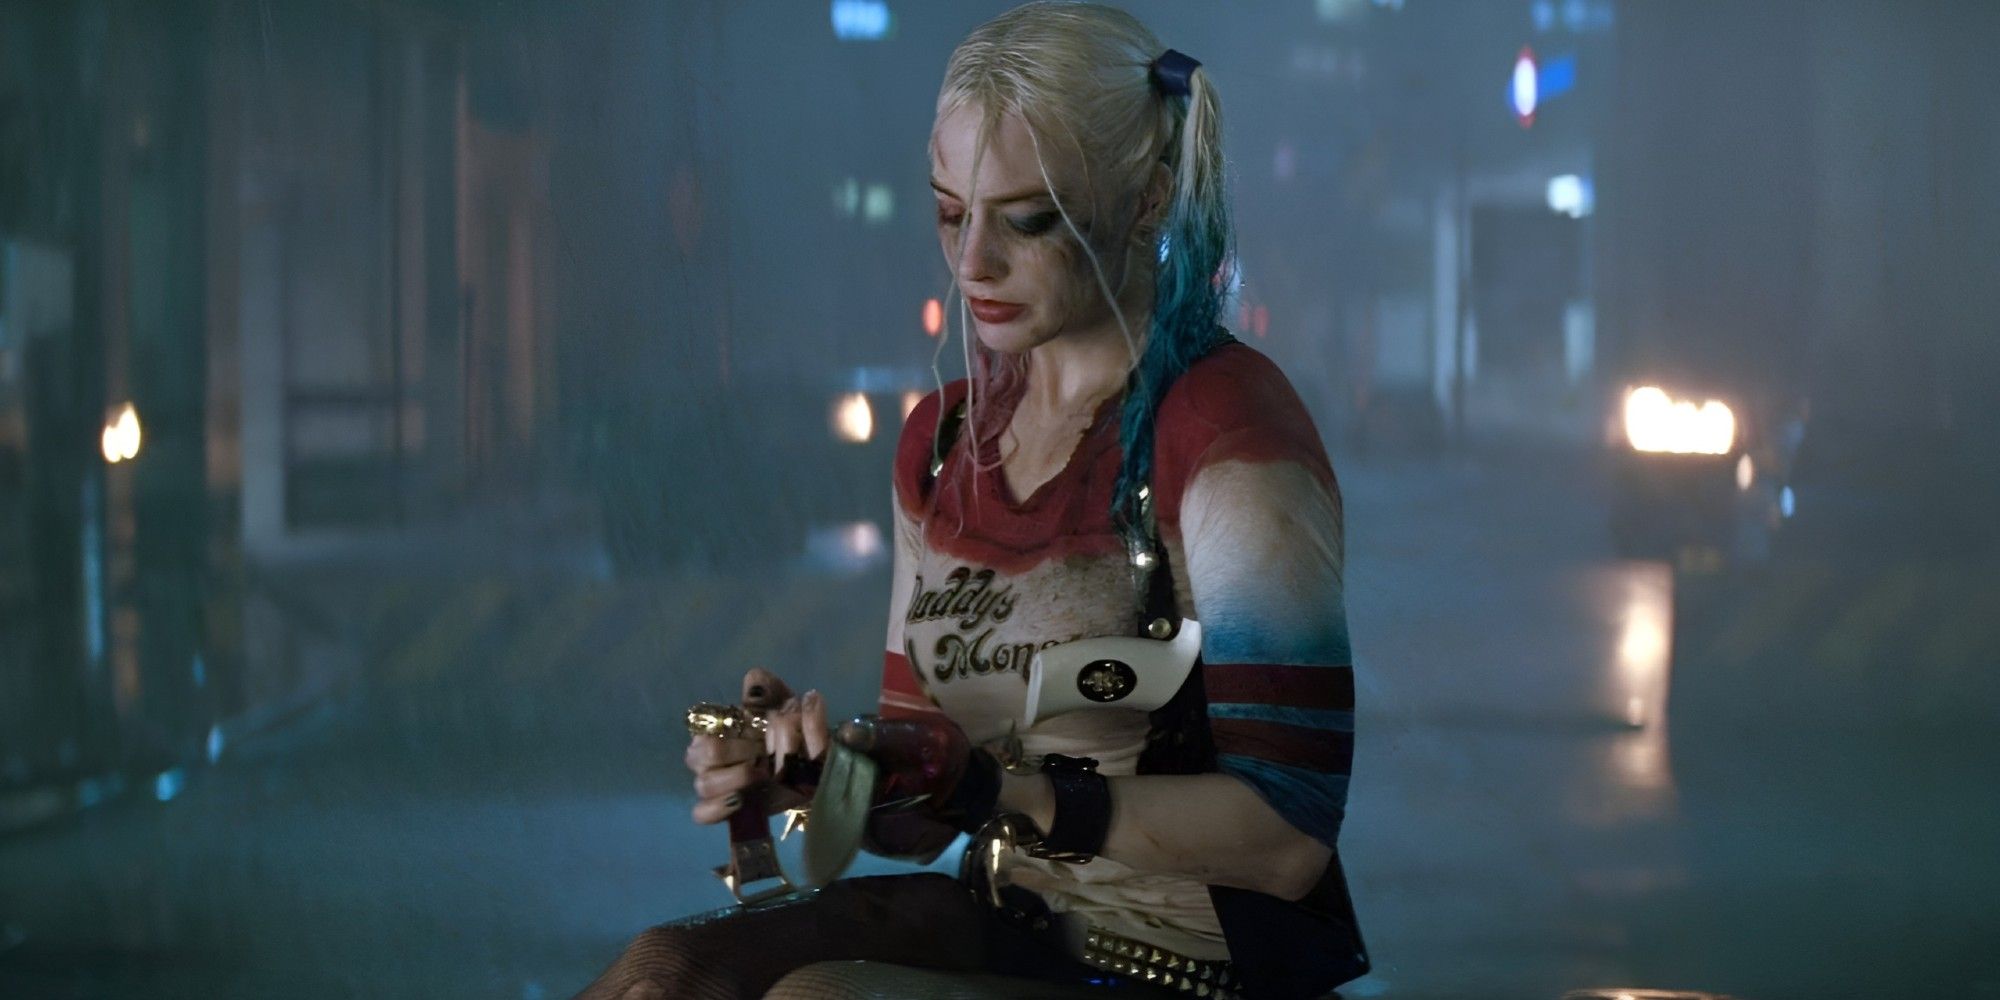 Margot Robbie as Harley Quinn sitting down in the middle of a street while it rains in a scene from 2016's Suicide Squad